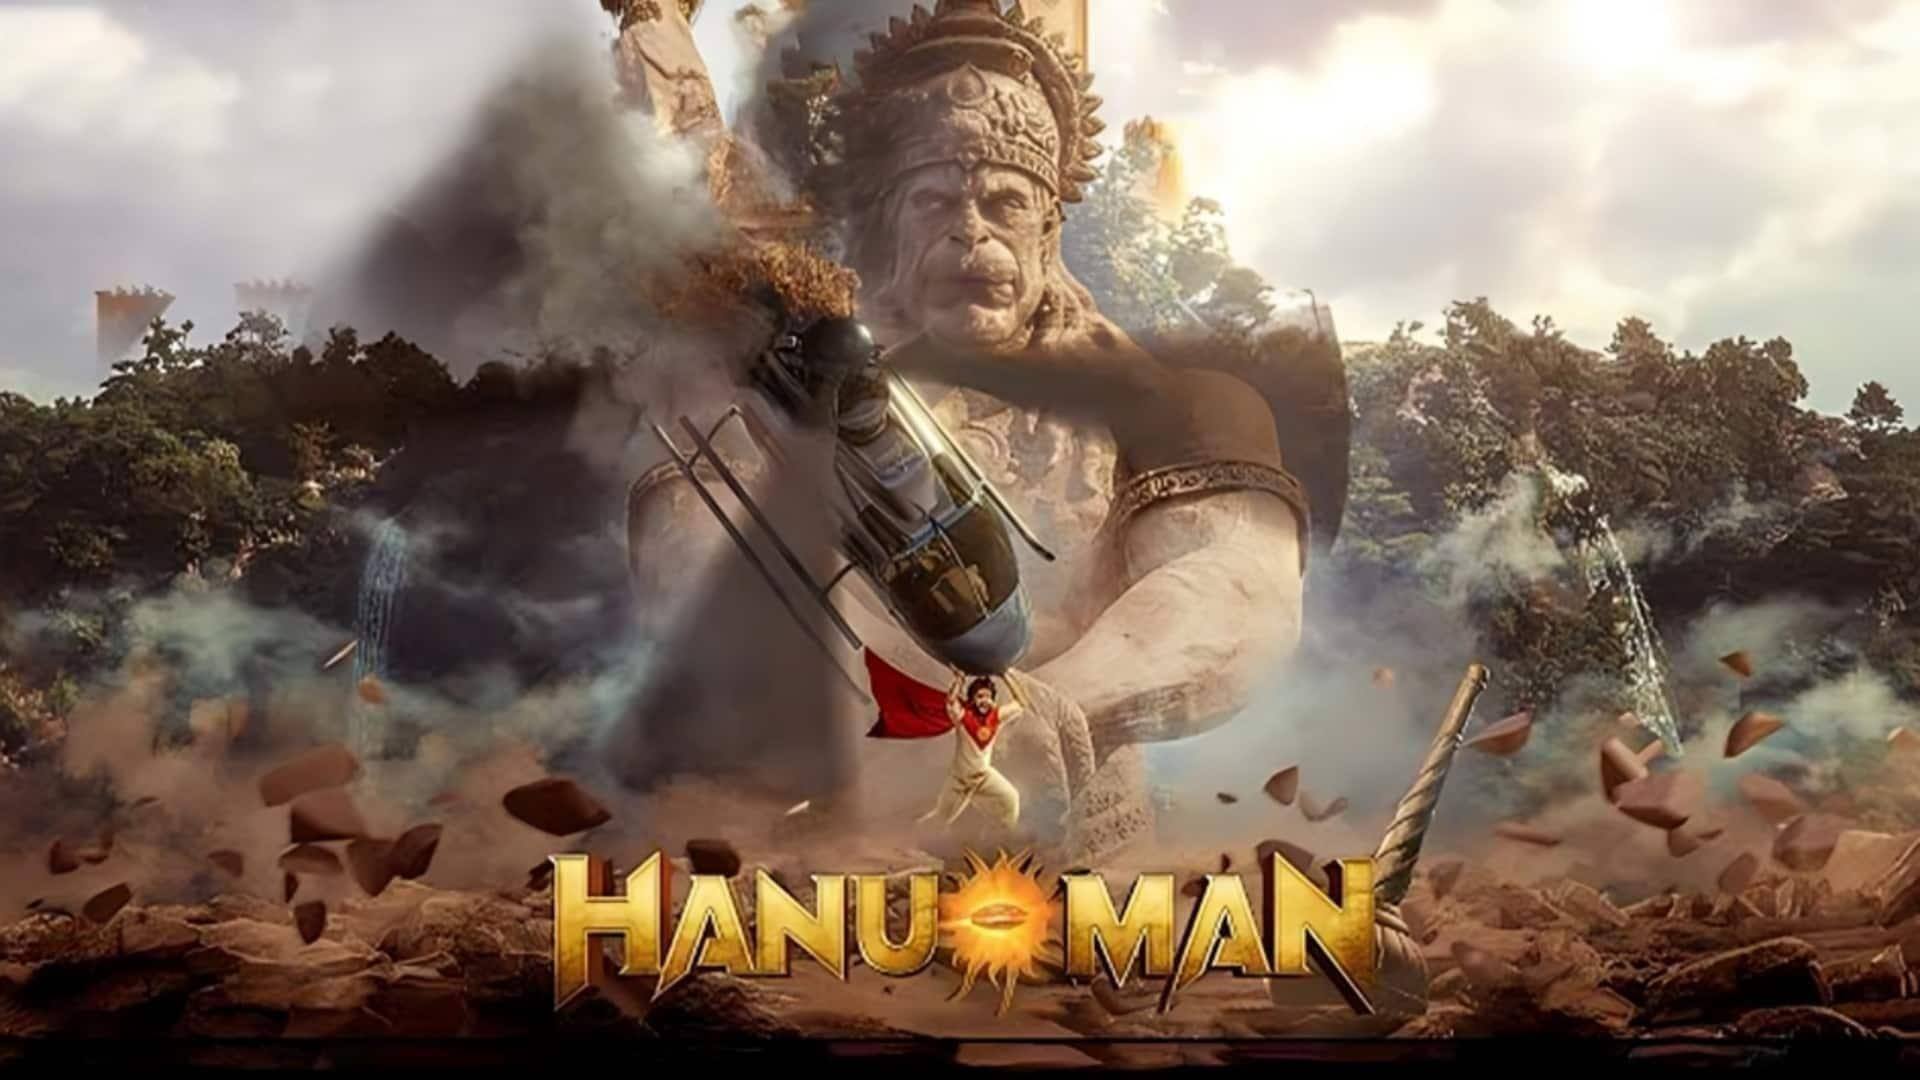 Box office collection: 'HanuMan' earns Rs. 3.5cr on day 23